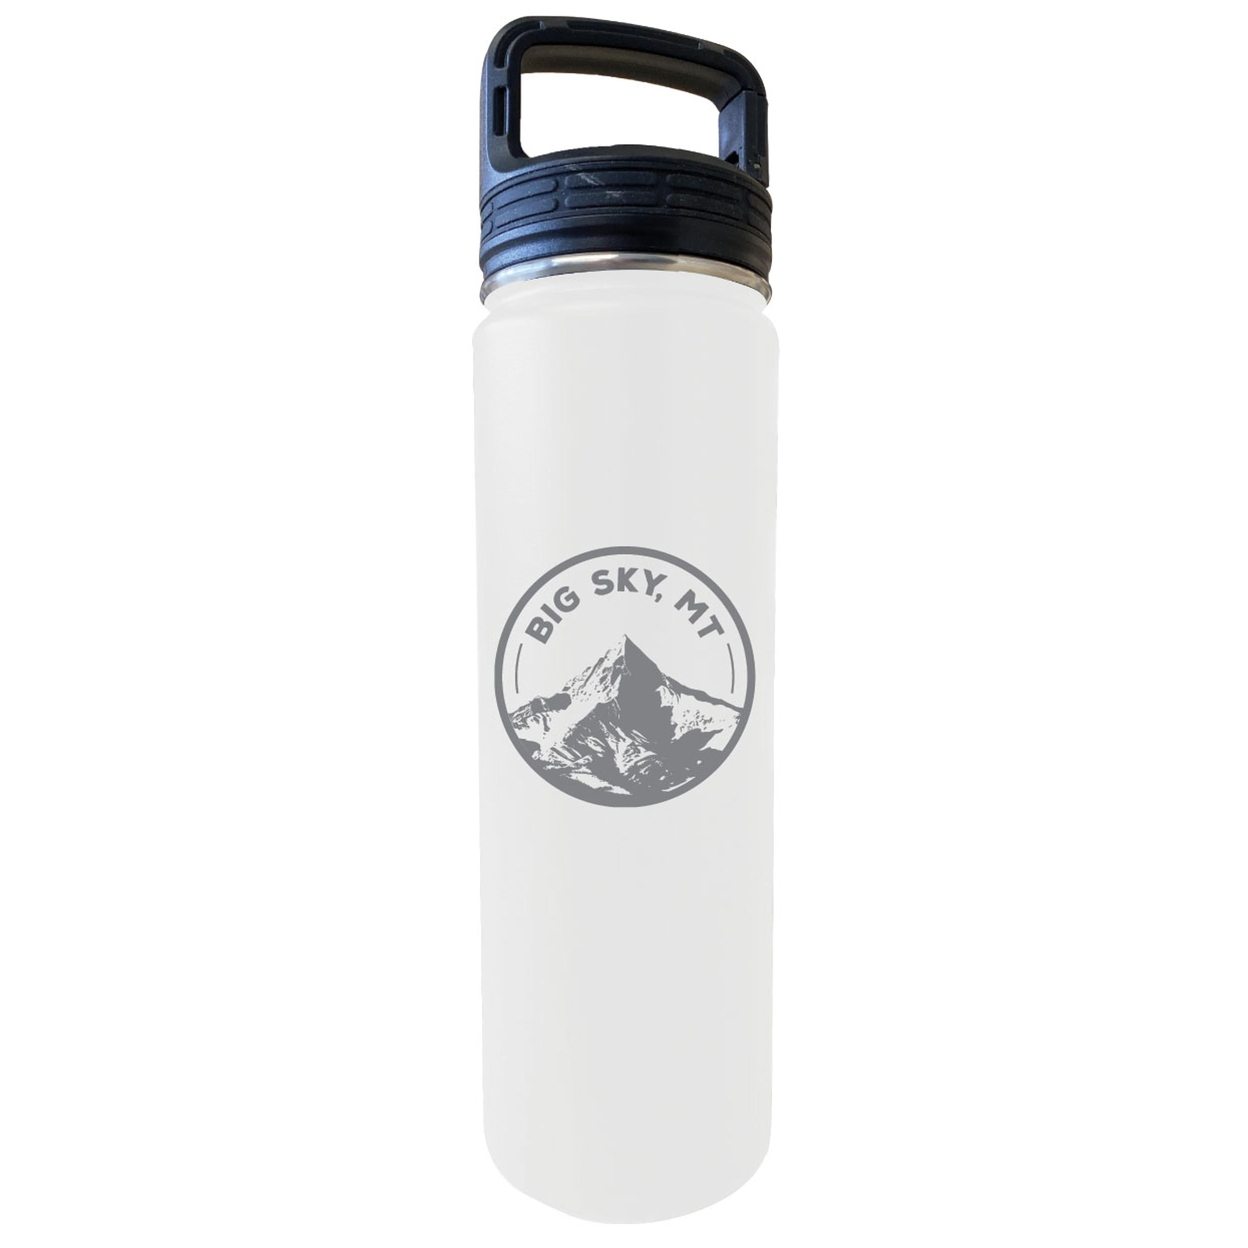 Big Sky Montana Souvenir 32 Oz Engraved Insulated Stainless Steel Tumbler - Red,,Single Unit